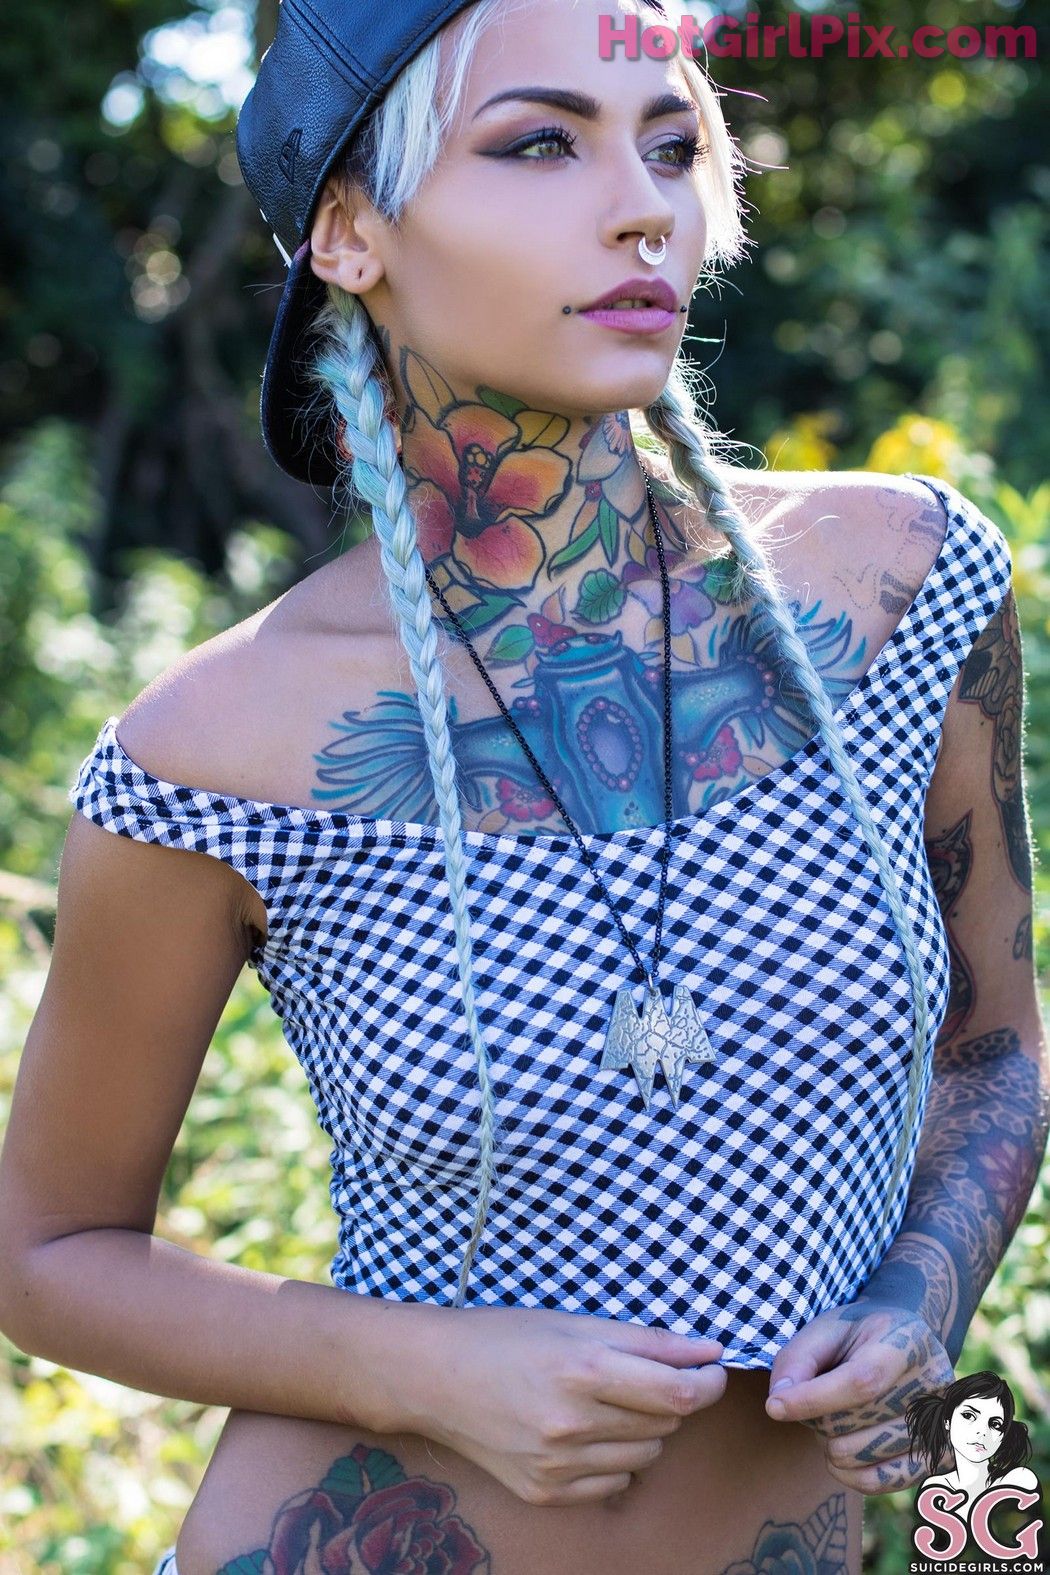 [Suicide Girls] Fishball - Lady Flower